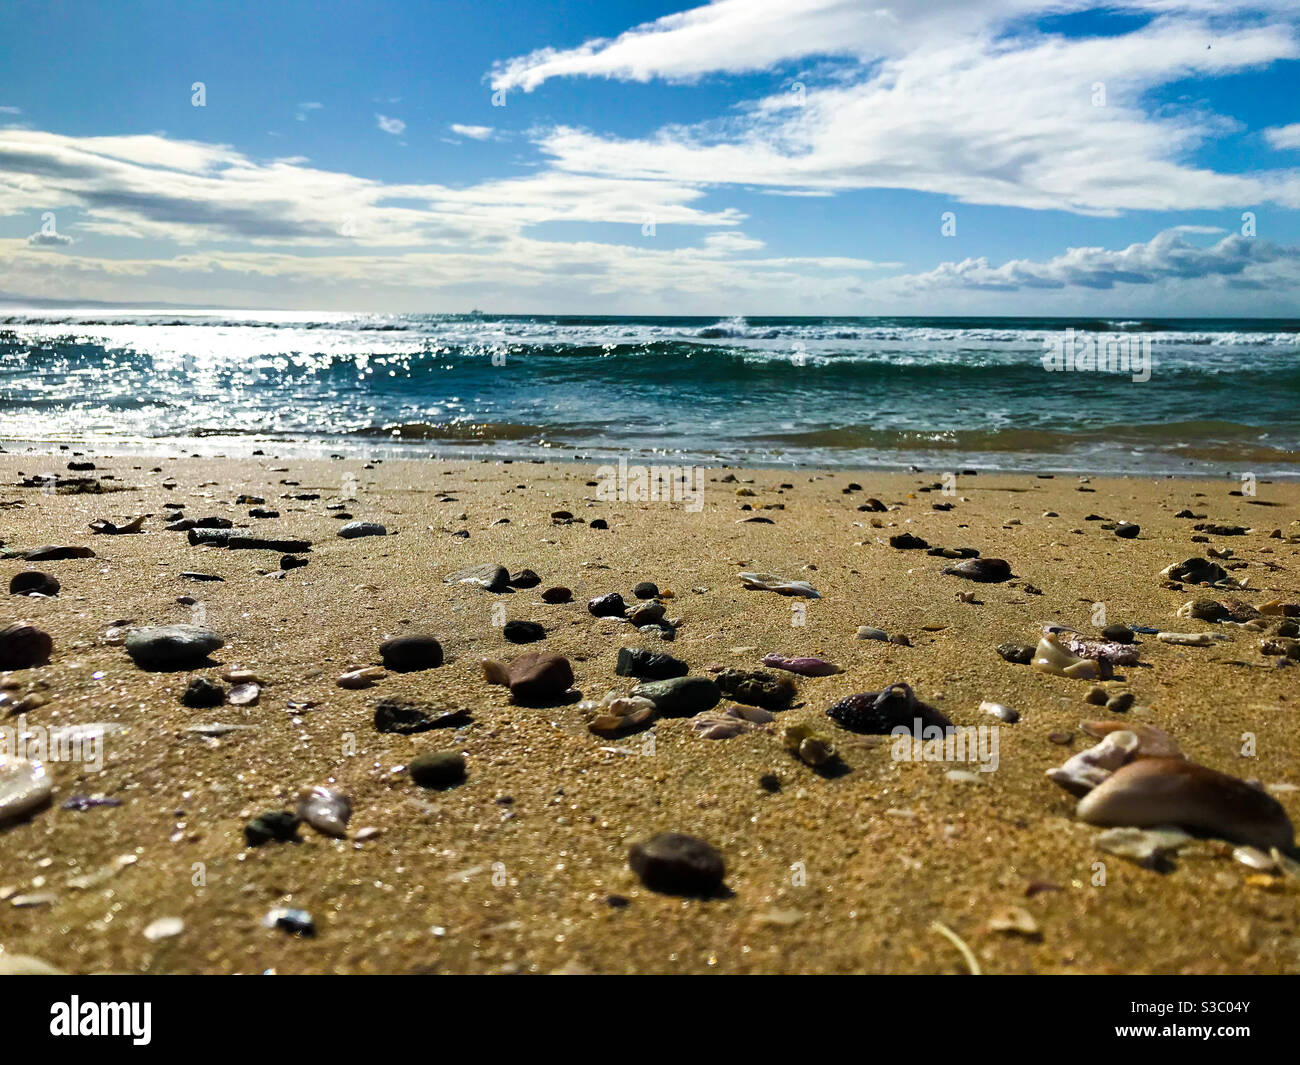 Close view of the beach that leads to the sea in the background. The beach is full of small shells and pebbles that the ocean placed on the beach. There is a cloudy sky and blue waters Stock Photo